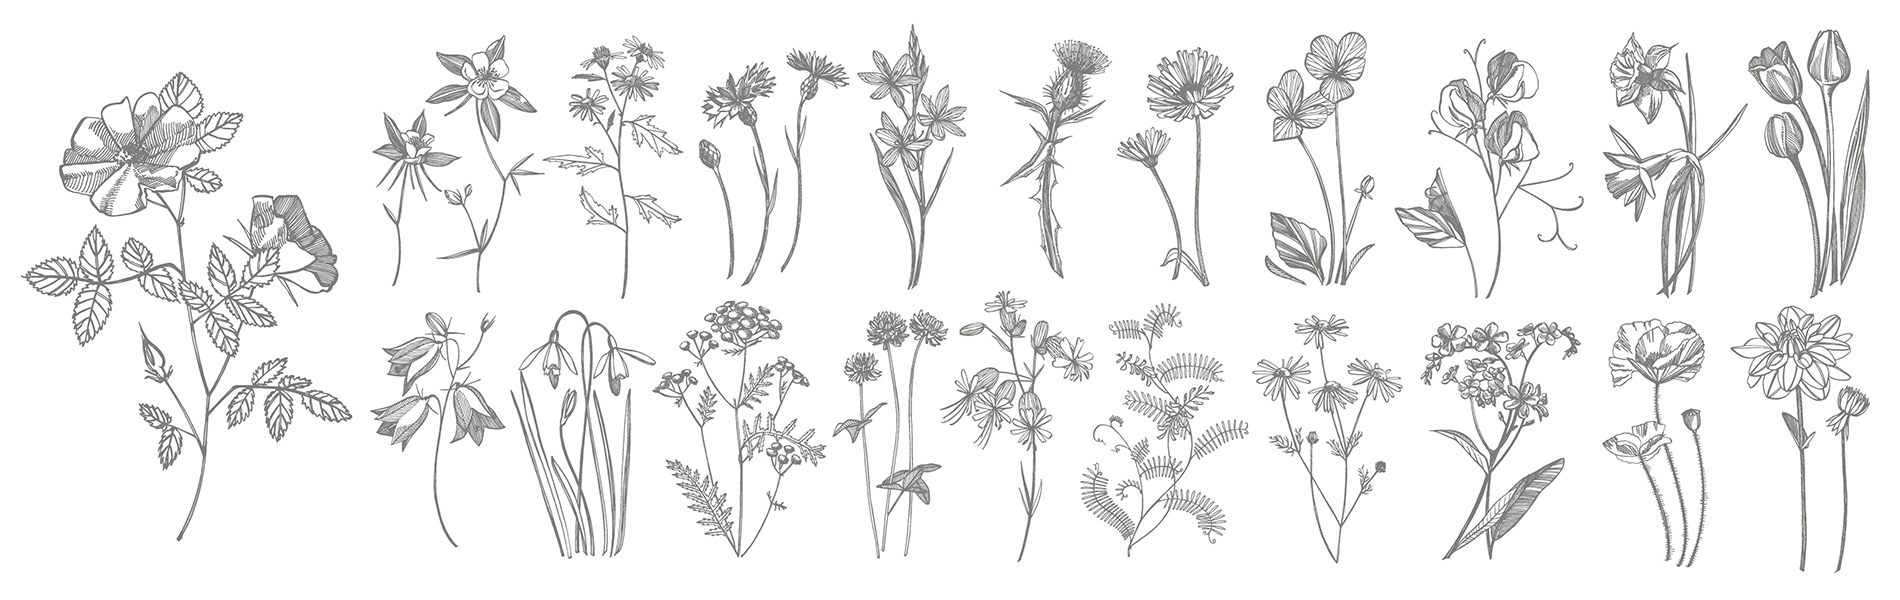 Feuille herbier fleurs sauvages